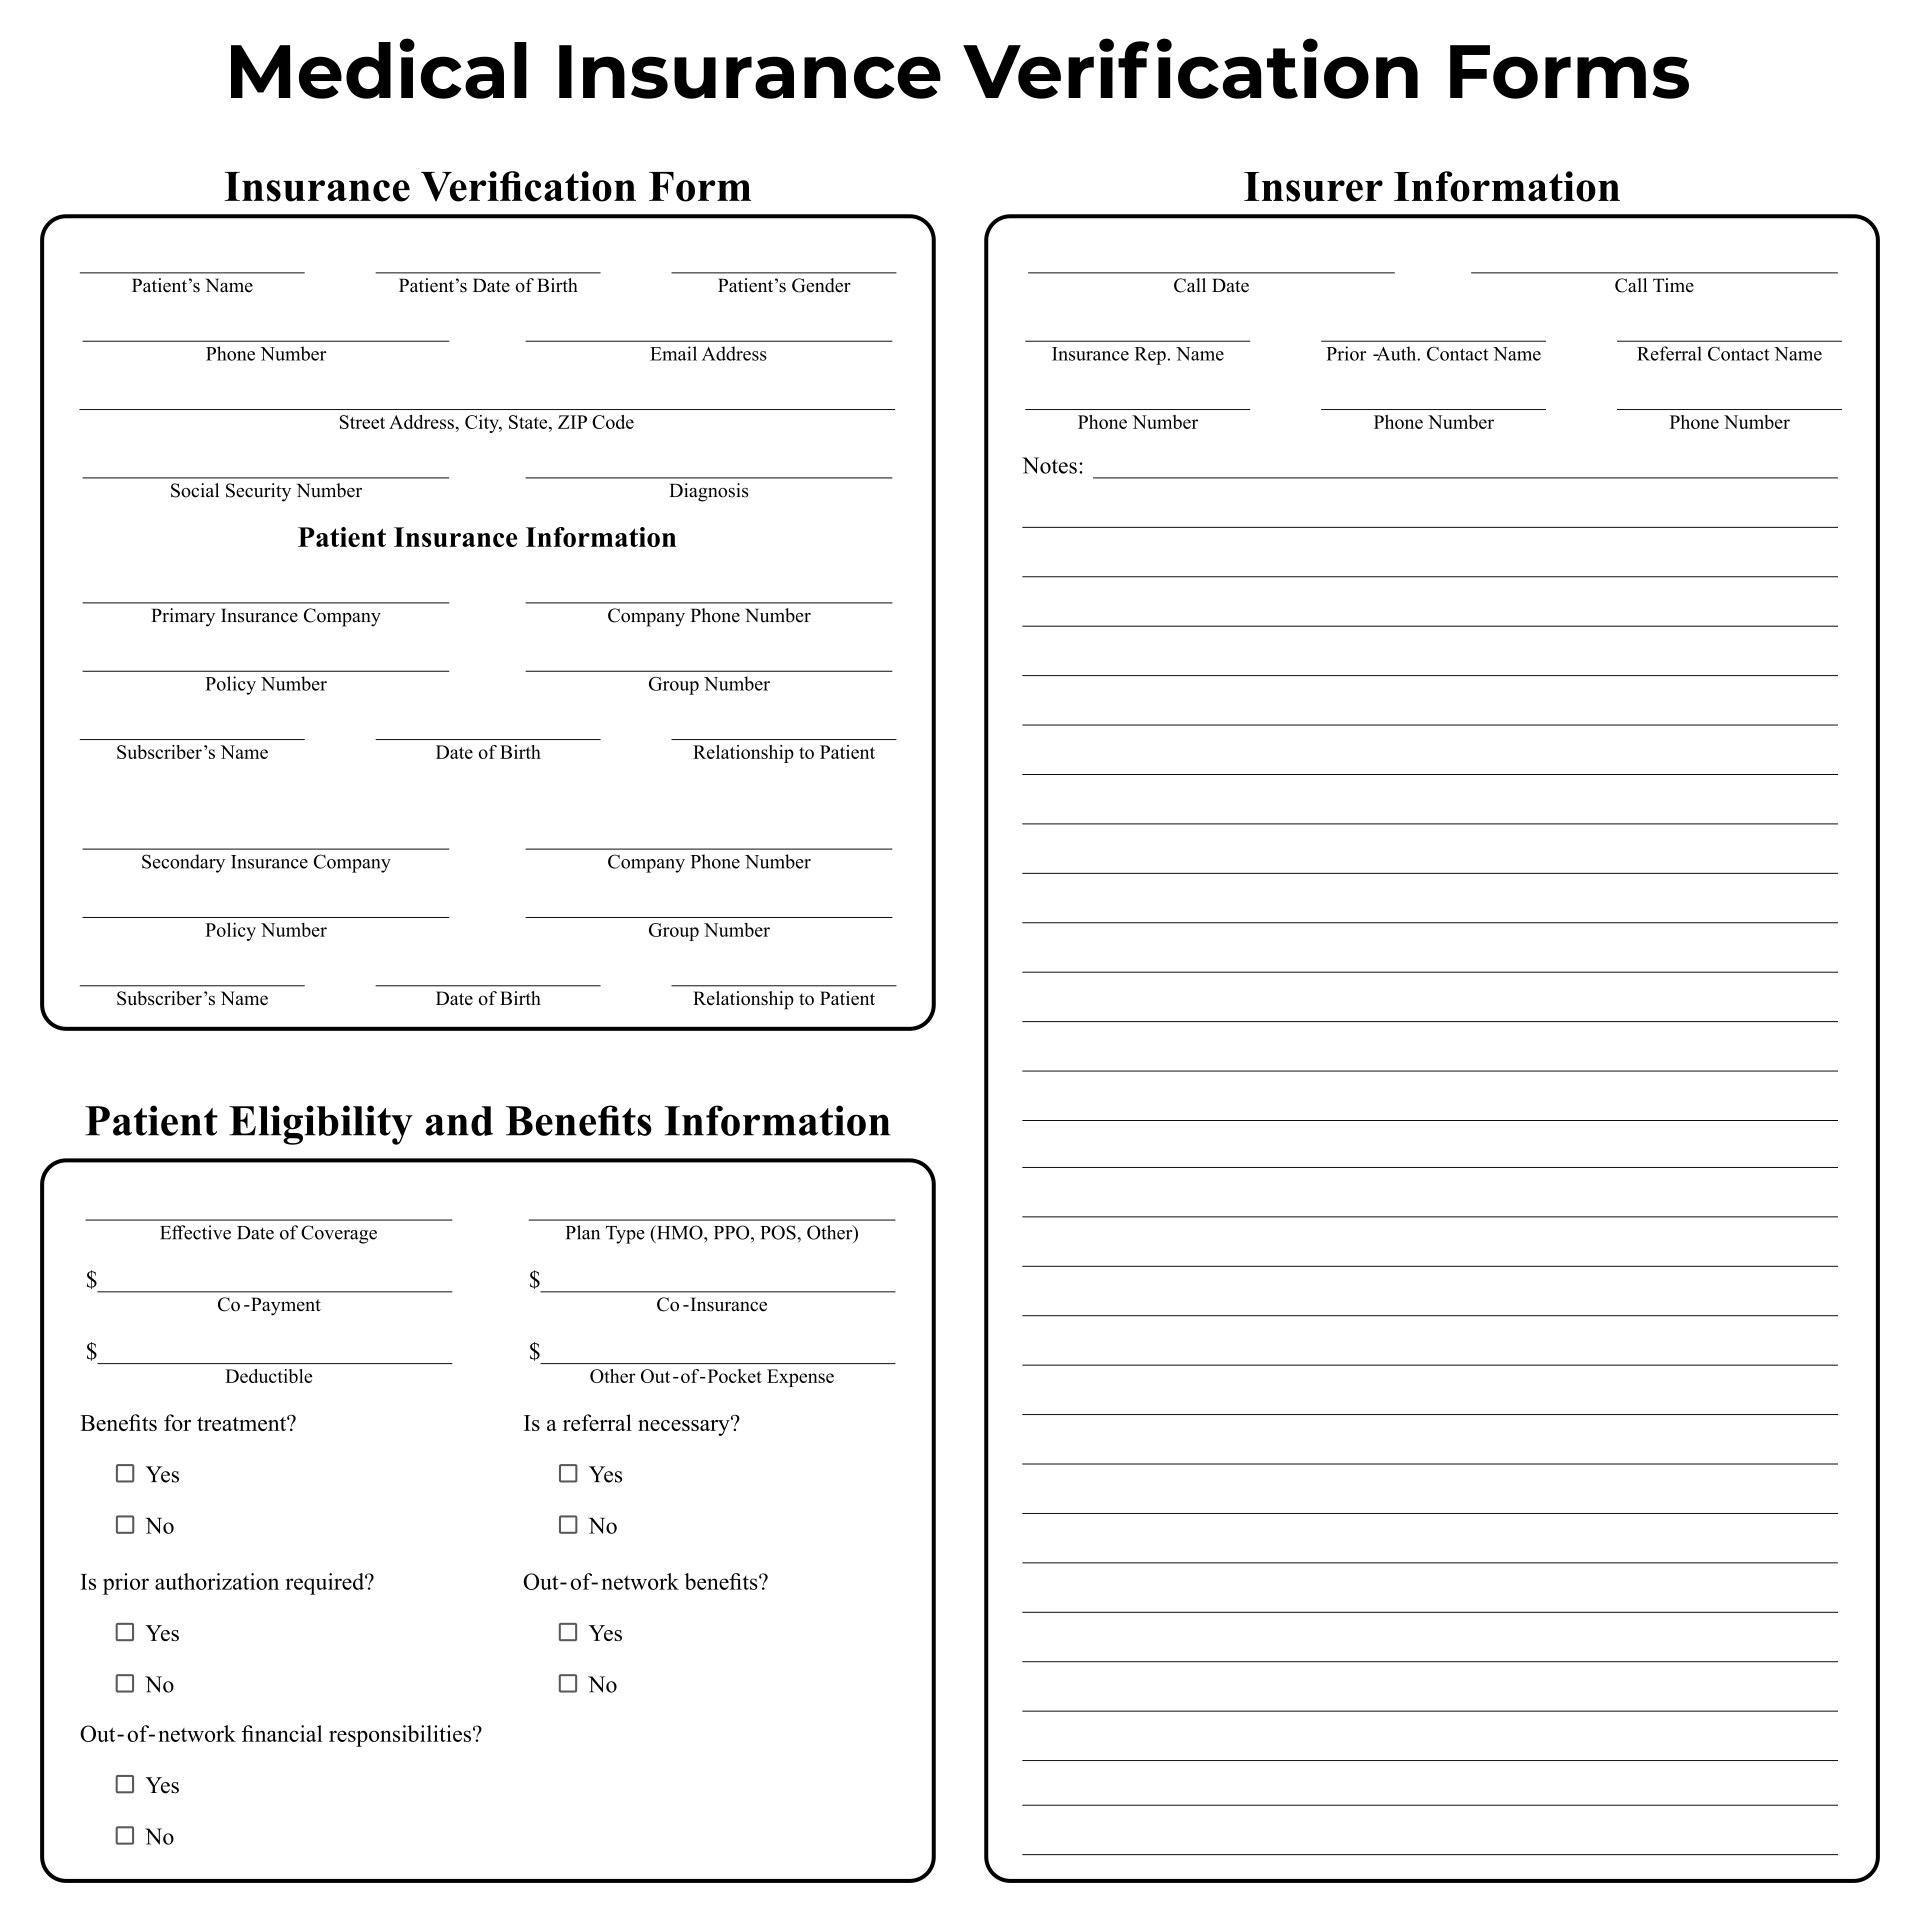 Blank Medical Insurance Verification Forms